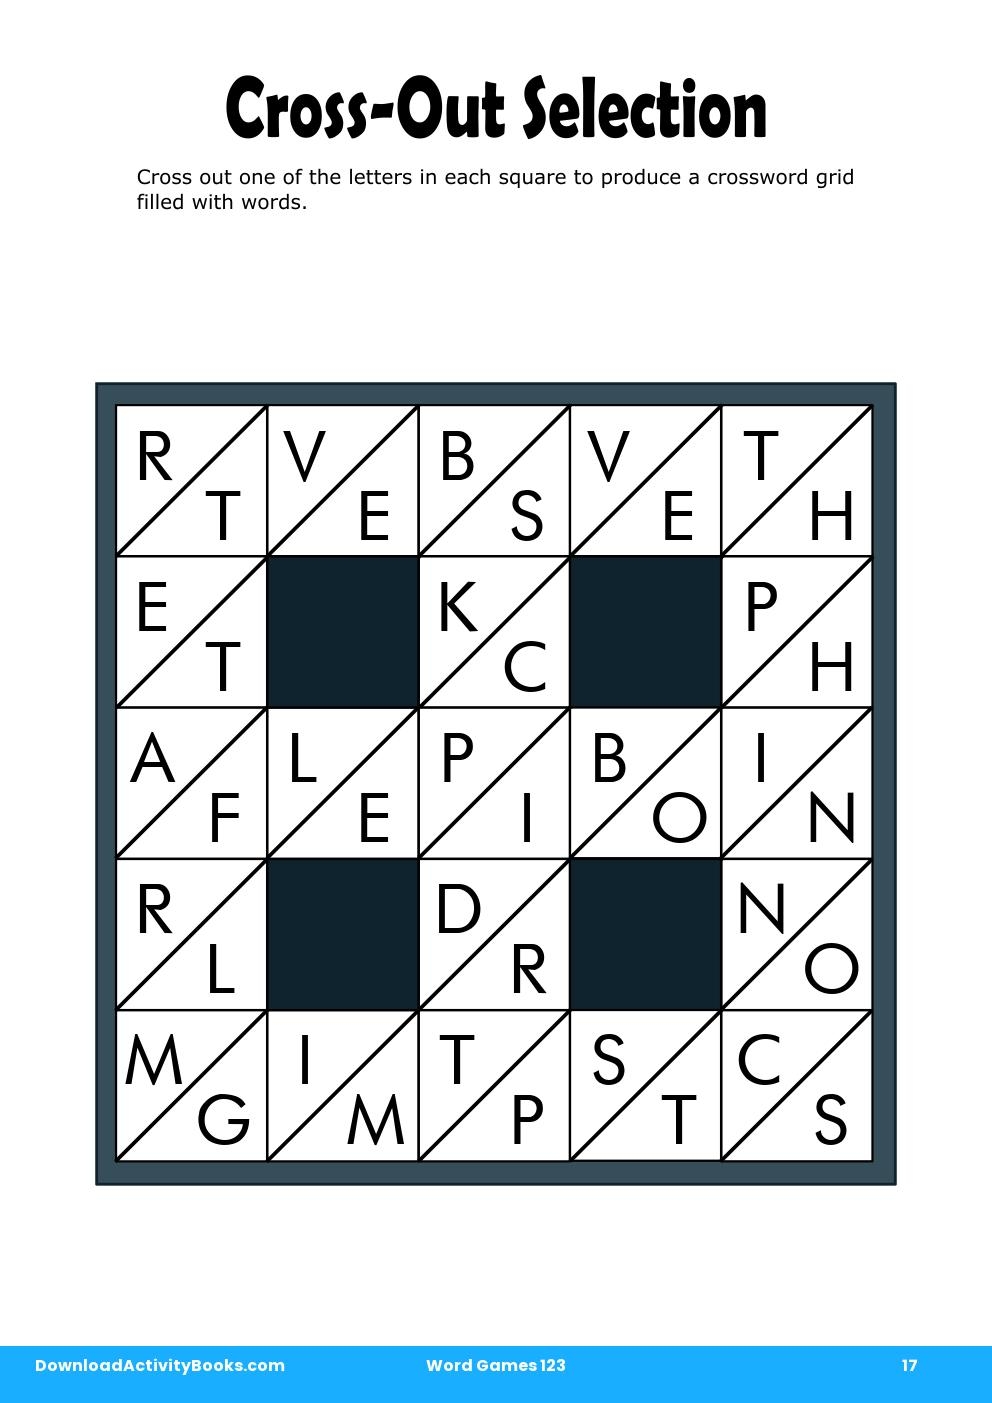 Cross-Out Selection in Word Games 123